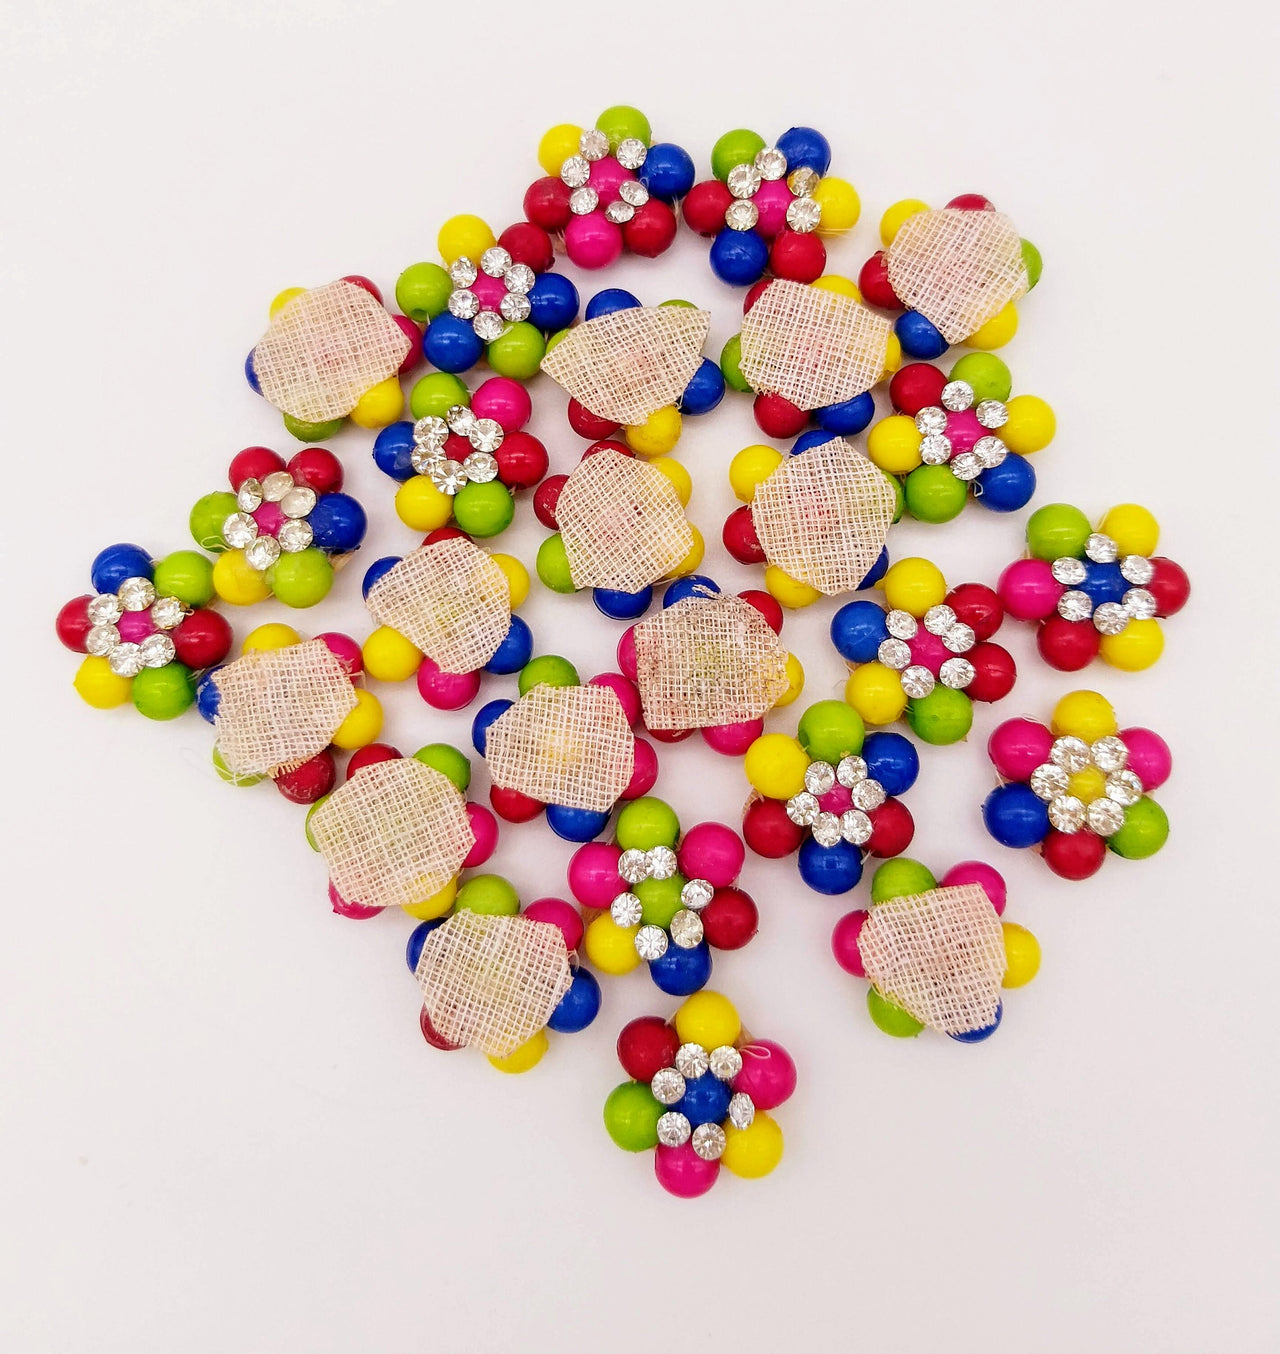 10 Beaded Floral Appliques In Multicoloured Beads and Rhinestones, Floral Appliques, Beaded Applique